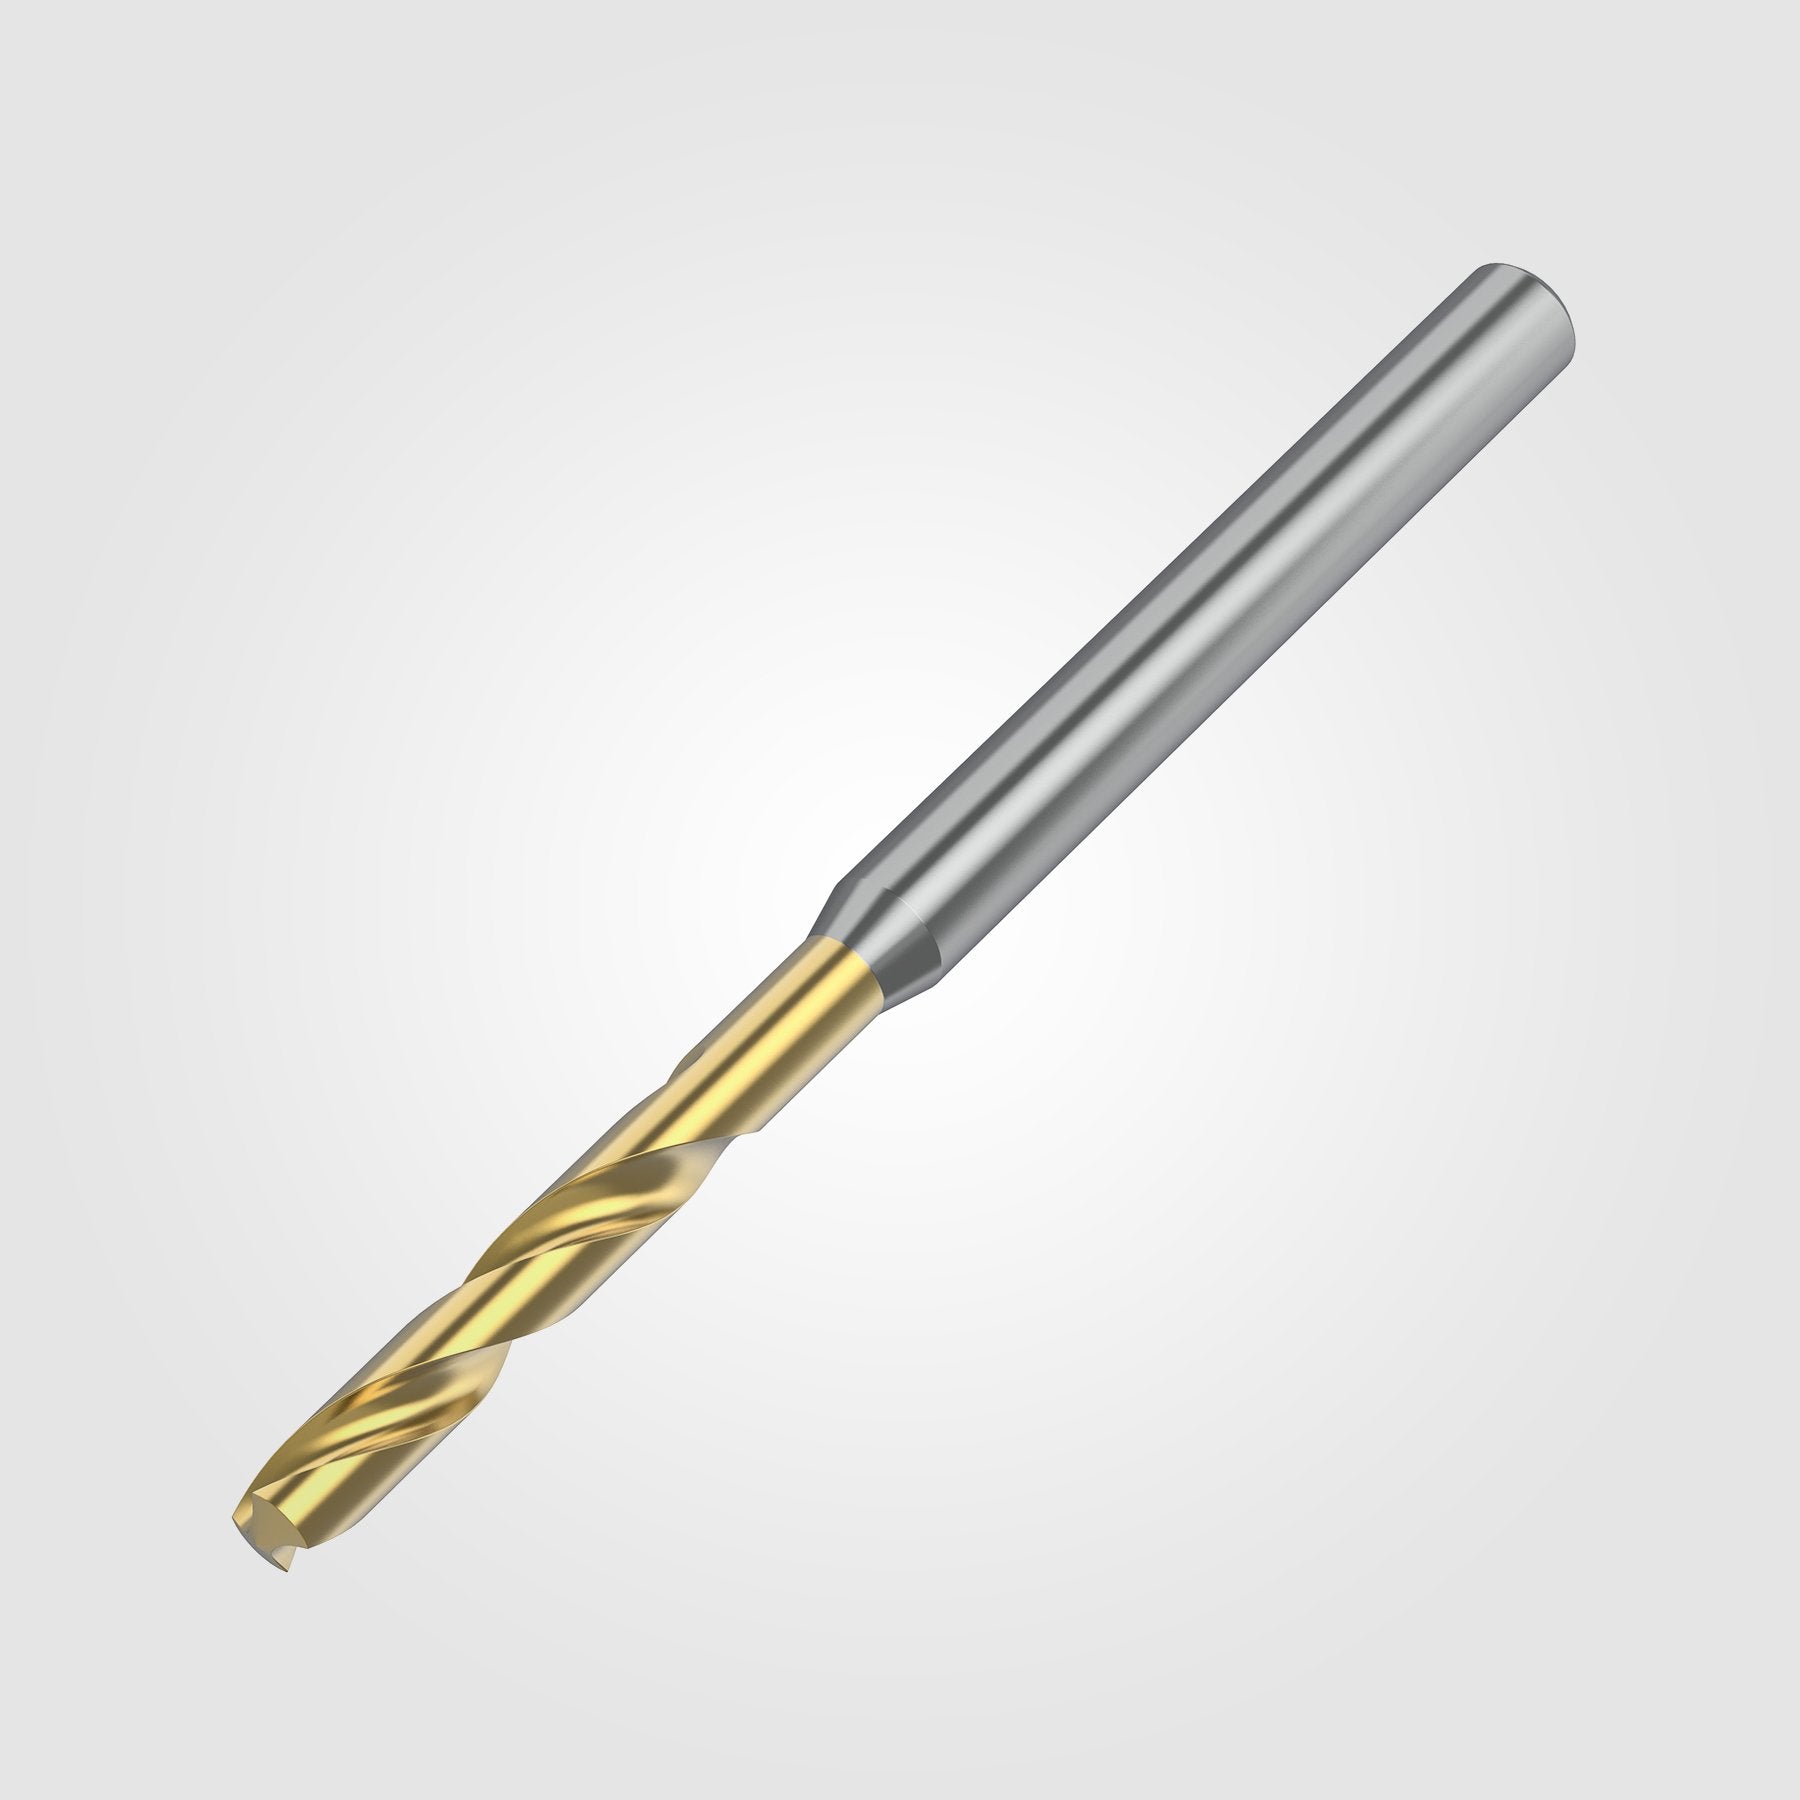 GOdrill (THROUGH COOLANT) | 6.35mm / .2500" / 8xD | SOLID CARBIDE DRILL | 4149645